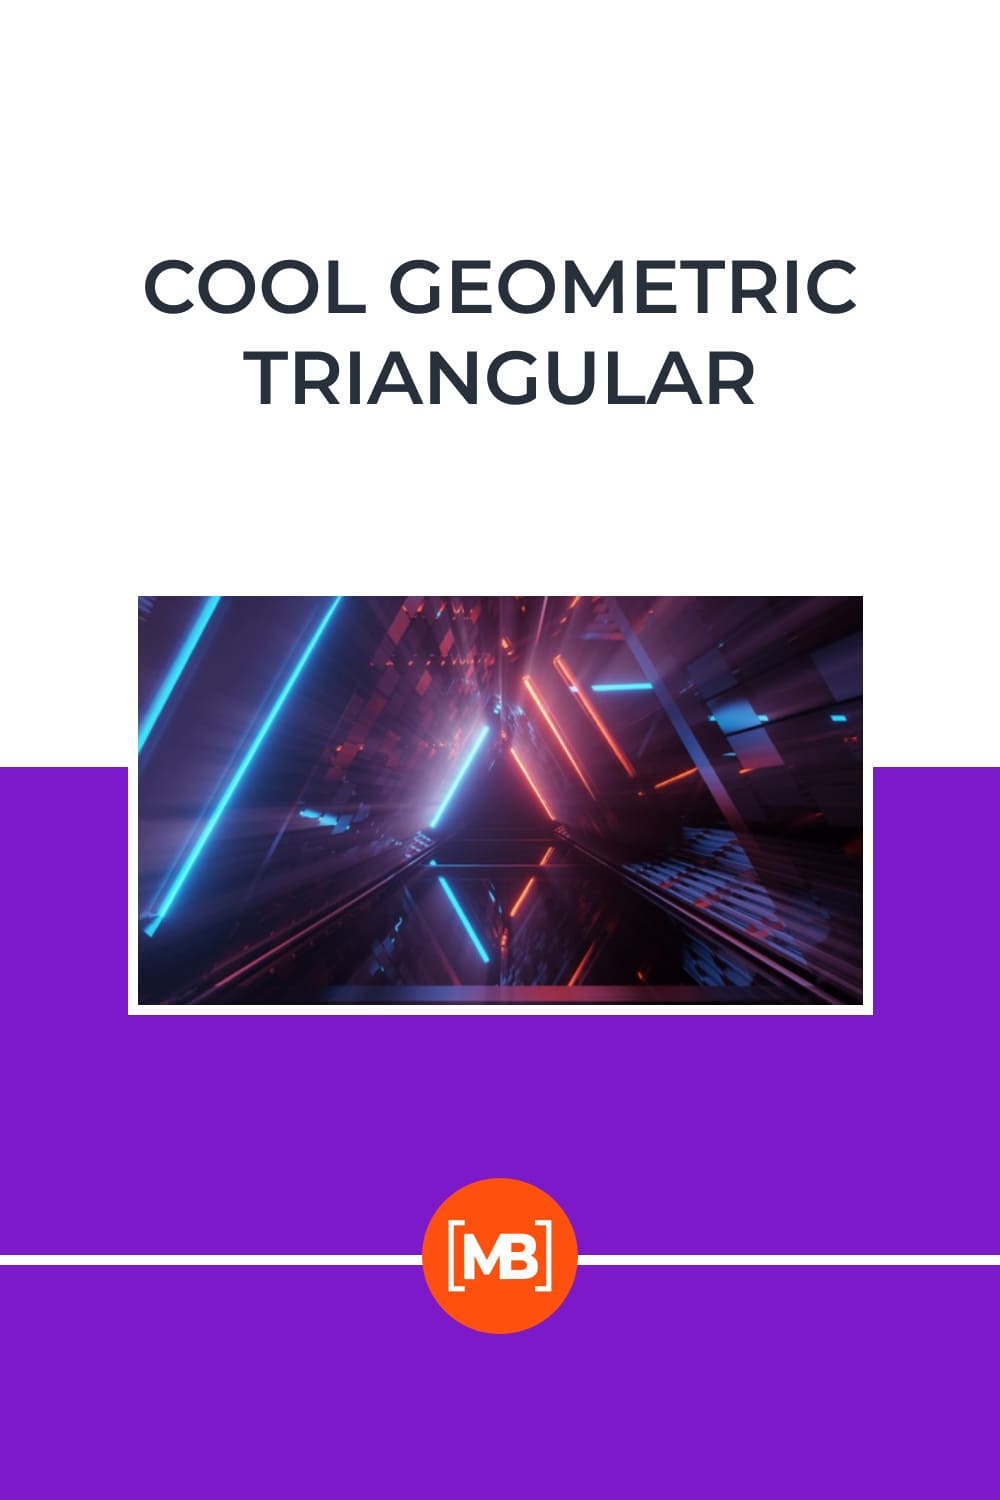 Cool geometric triangular figure in a neon laser light - great for background.